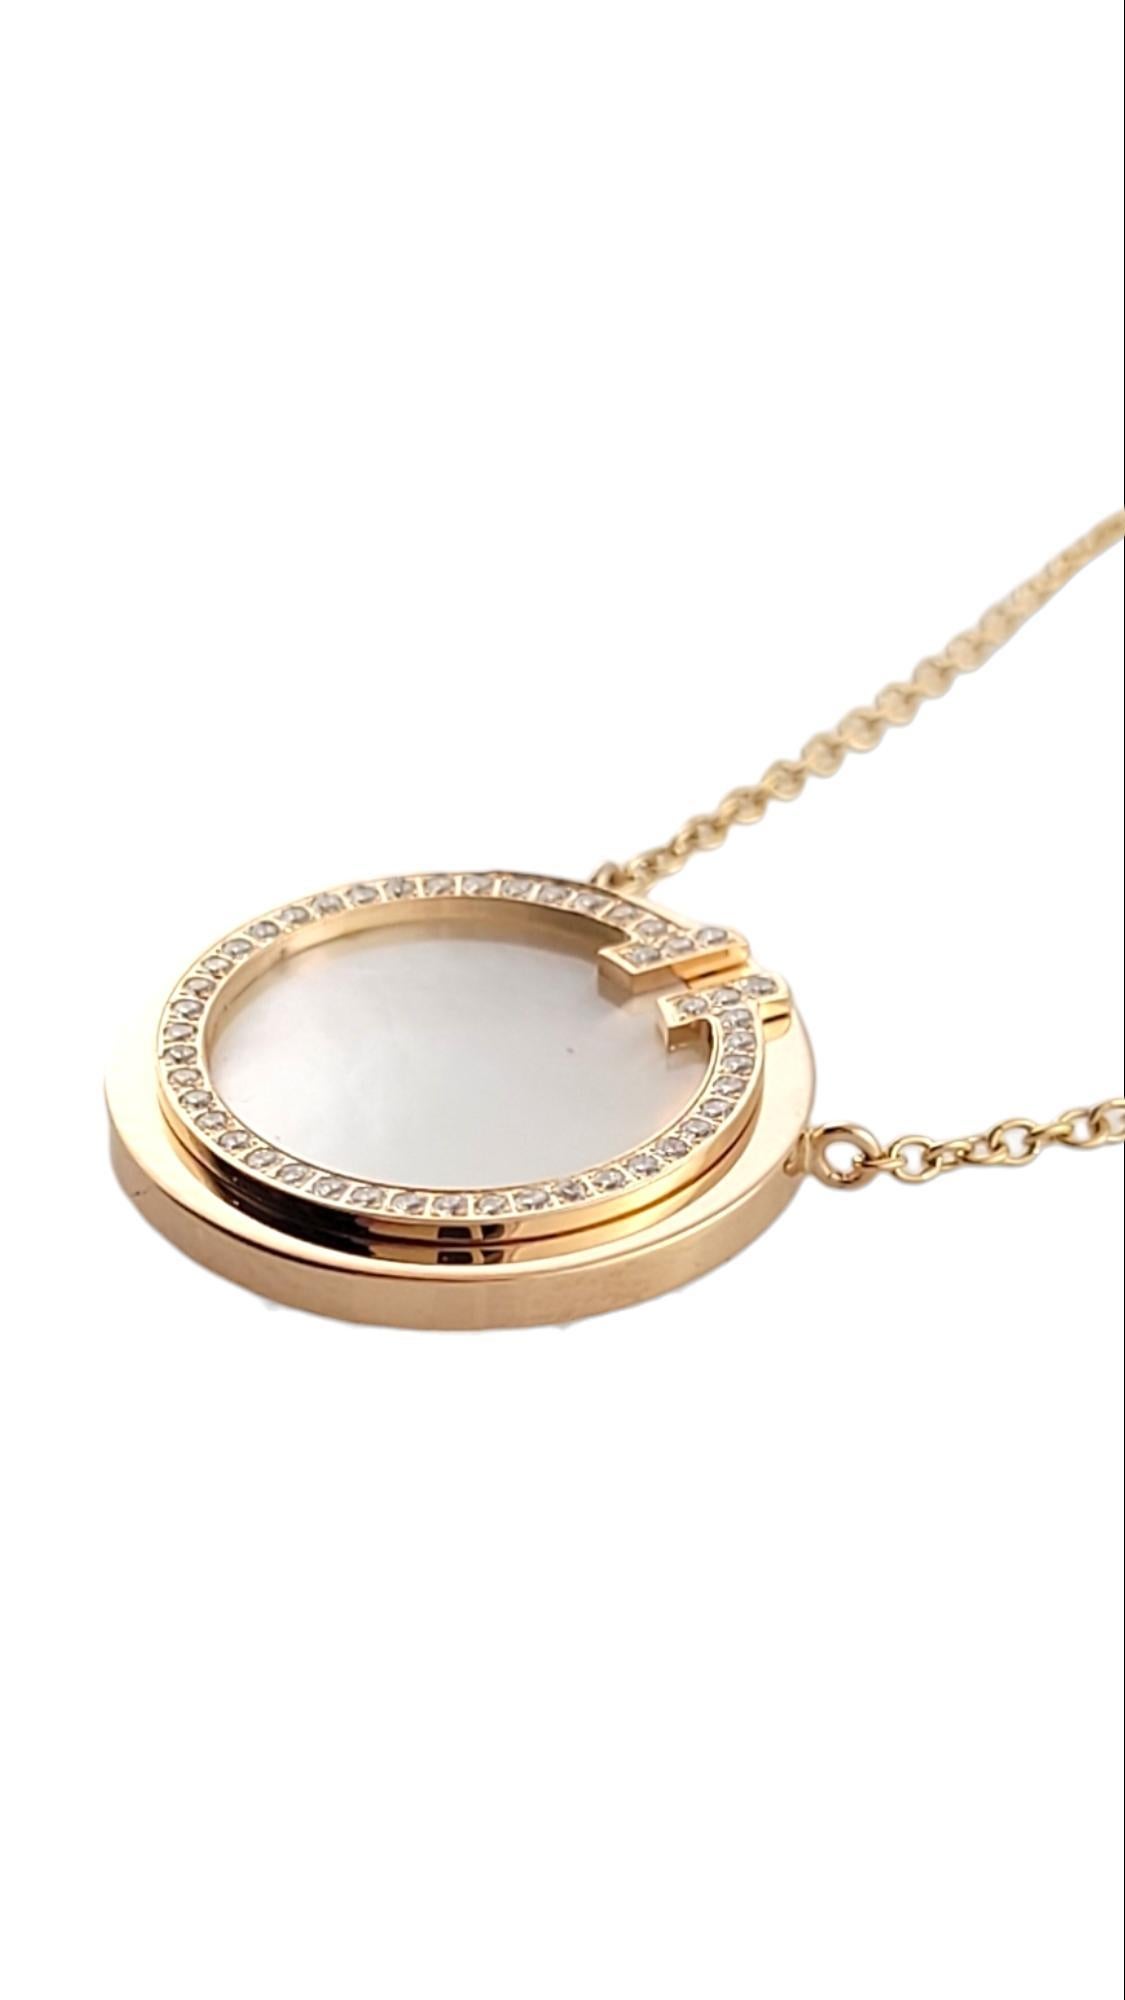 Brilliant Cut Tiffany & Co. 18K Rose Gold Diamond Mother of Pearl Necklace #17042 For Sale